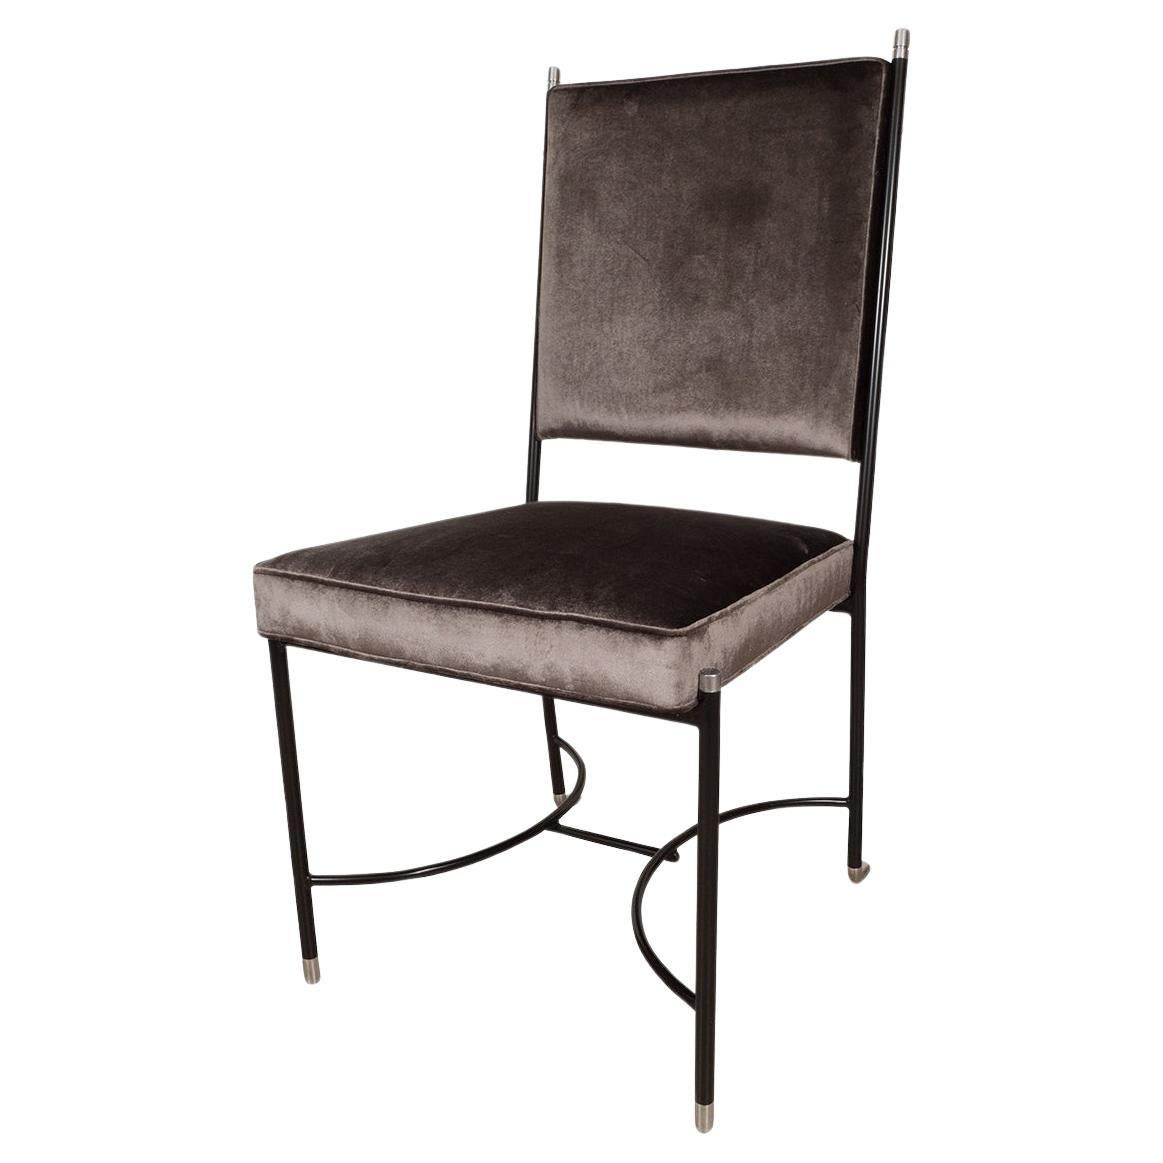 Upholstered desk chair with stylized blackened frame For Sale